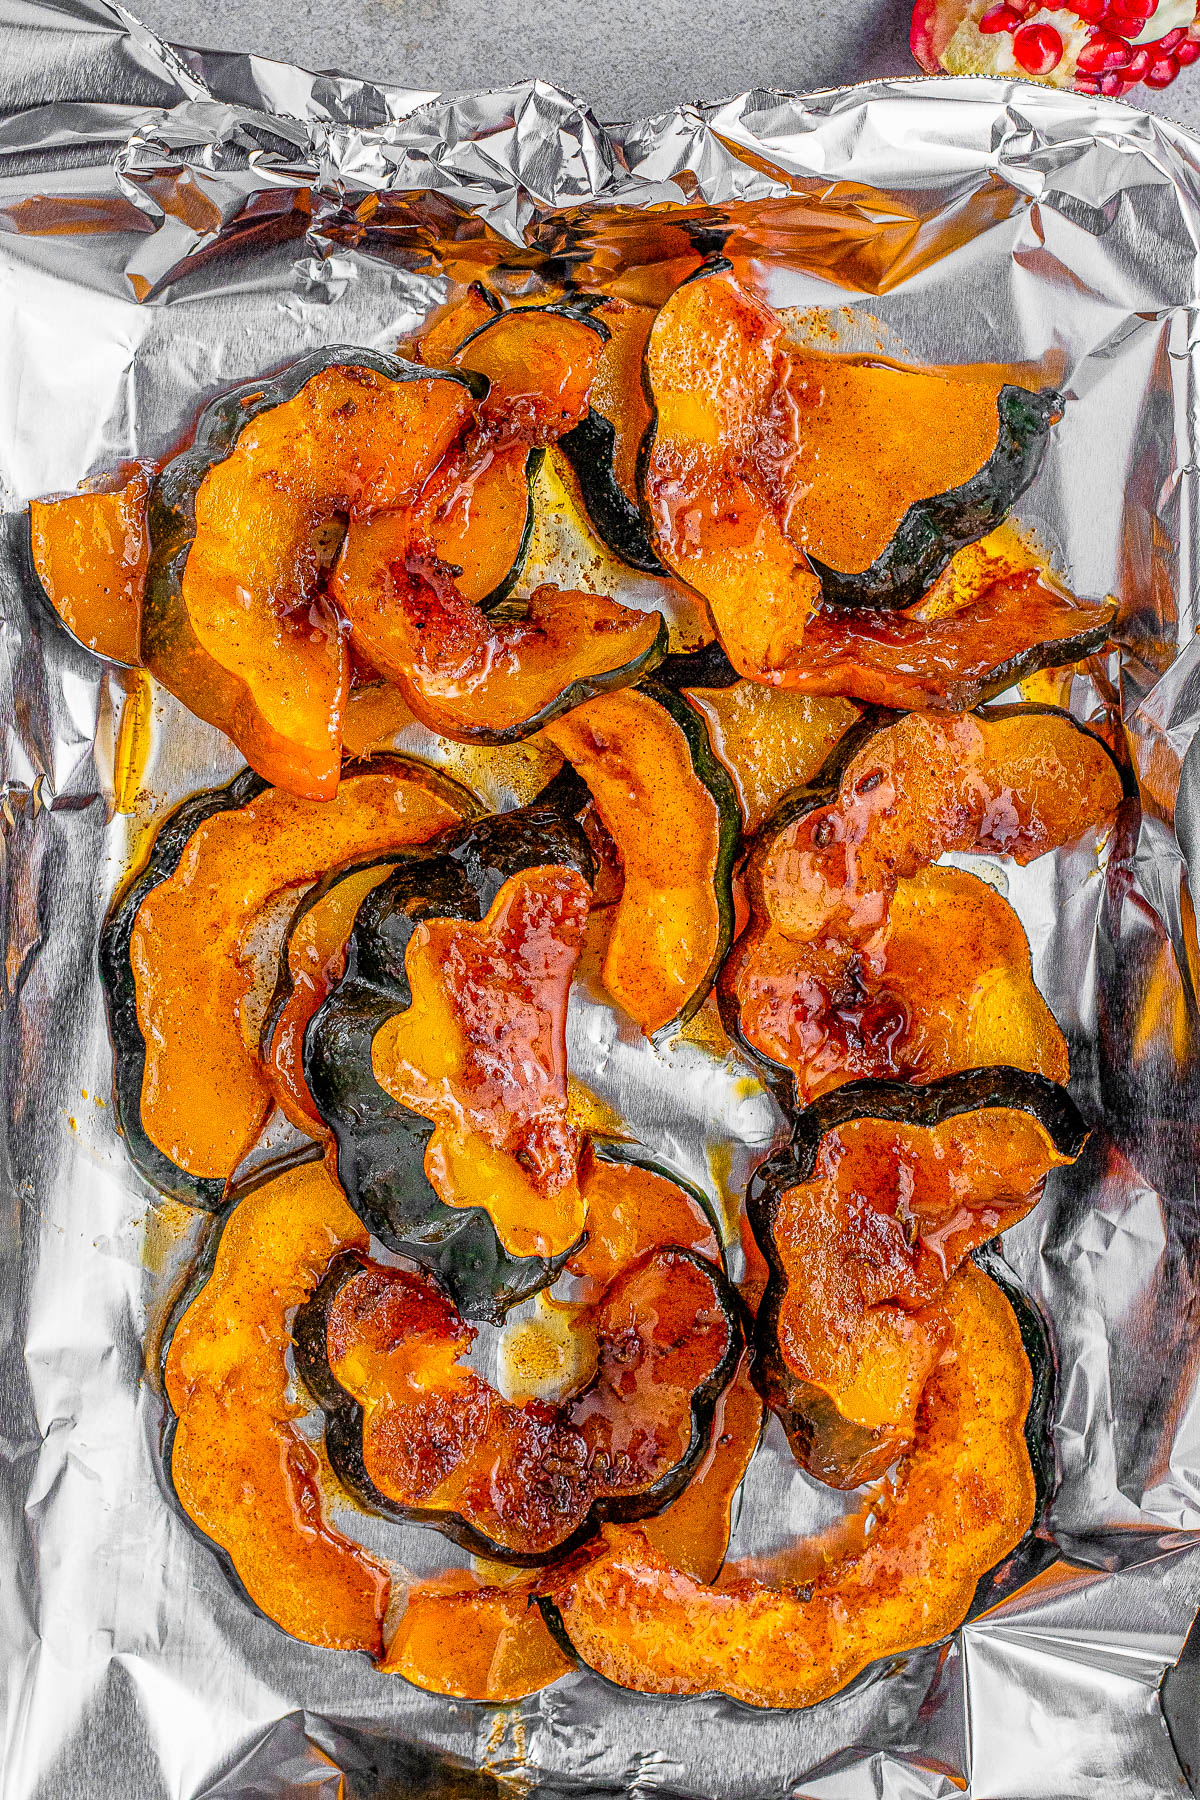 Sweet and Spicy Acorn Squash - Tender oven-roasted acorn squash is made extra fabulous with a sweet and spicy orange-infused butter sauce. It's topped with toasted sage leaves, pumpkin seeds, pomegranate arils, and a touch of orange zest for a festive touch. An EASY fall-flavored side dish that's ready in 20 minutes! Perfect for weeknight dinners or put it on your Thanksgiving or Christmas menus! 